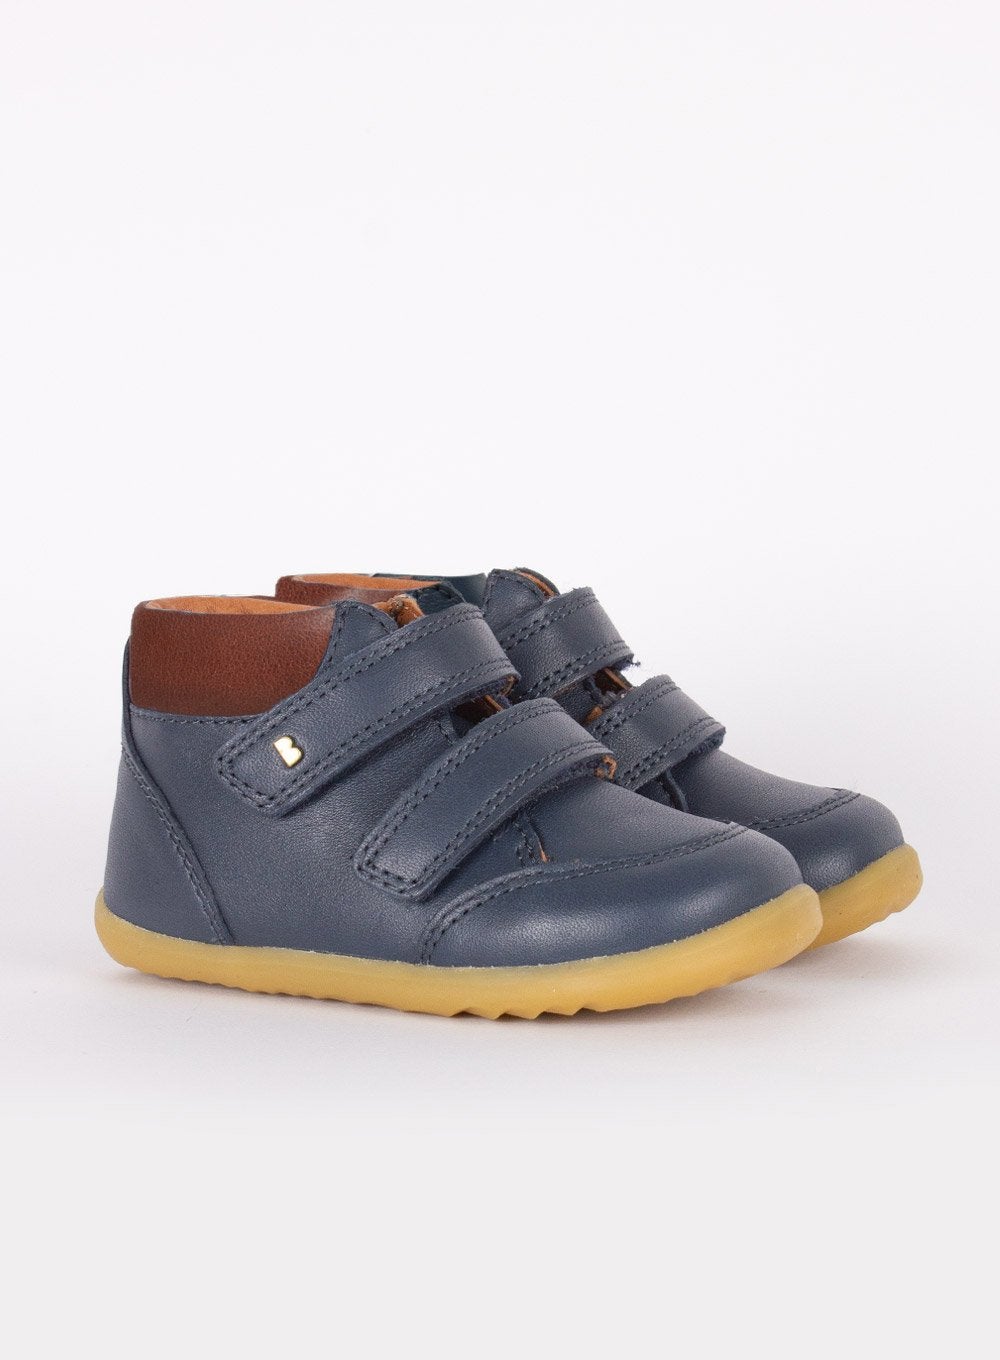 Bobux Timber B Boots in Navy | Trotters Childrenswear